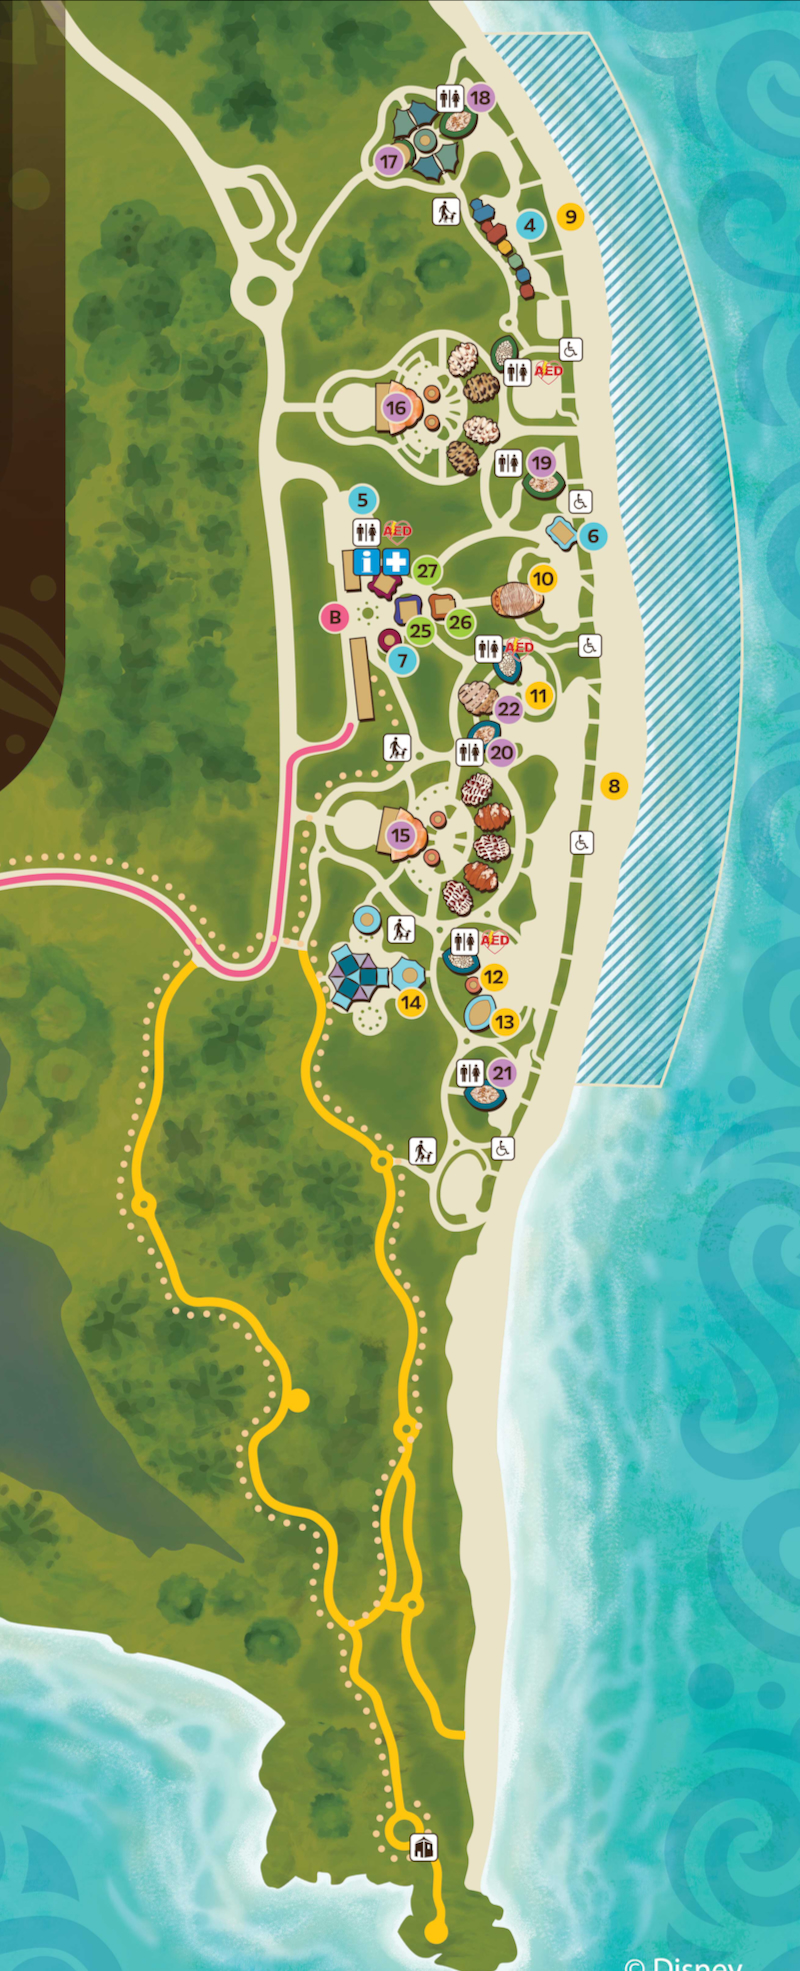 Disney Lookout Cay at Lighthouse Point Map